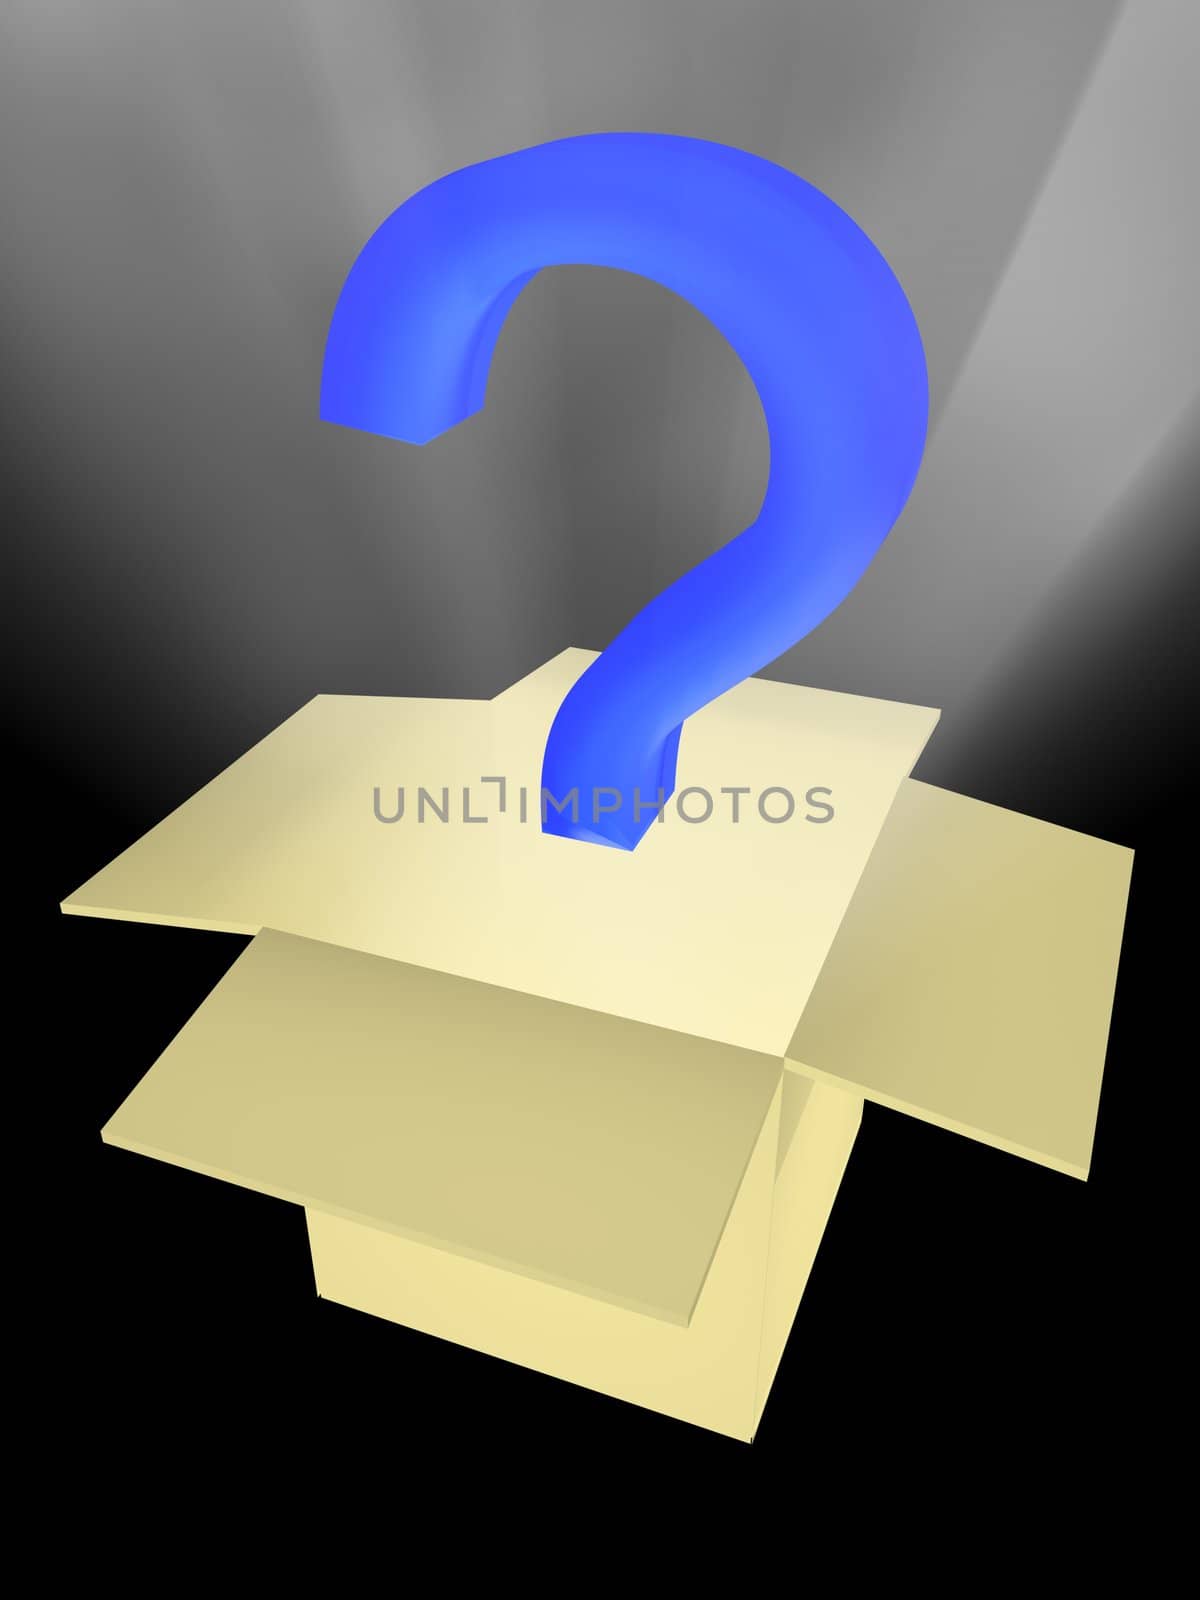 Unknown surprise in a box. Abstract 3D image